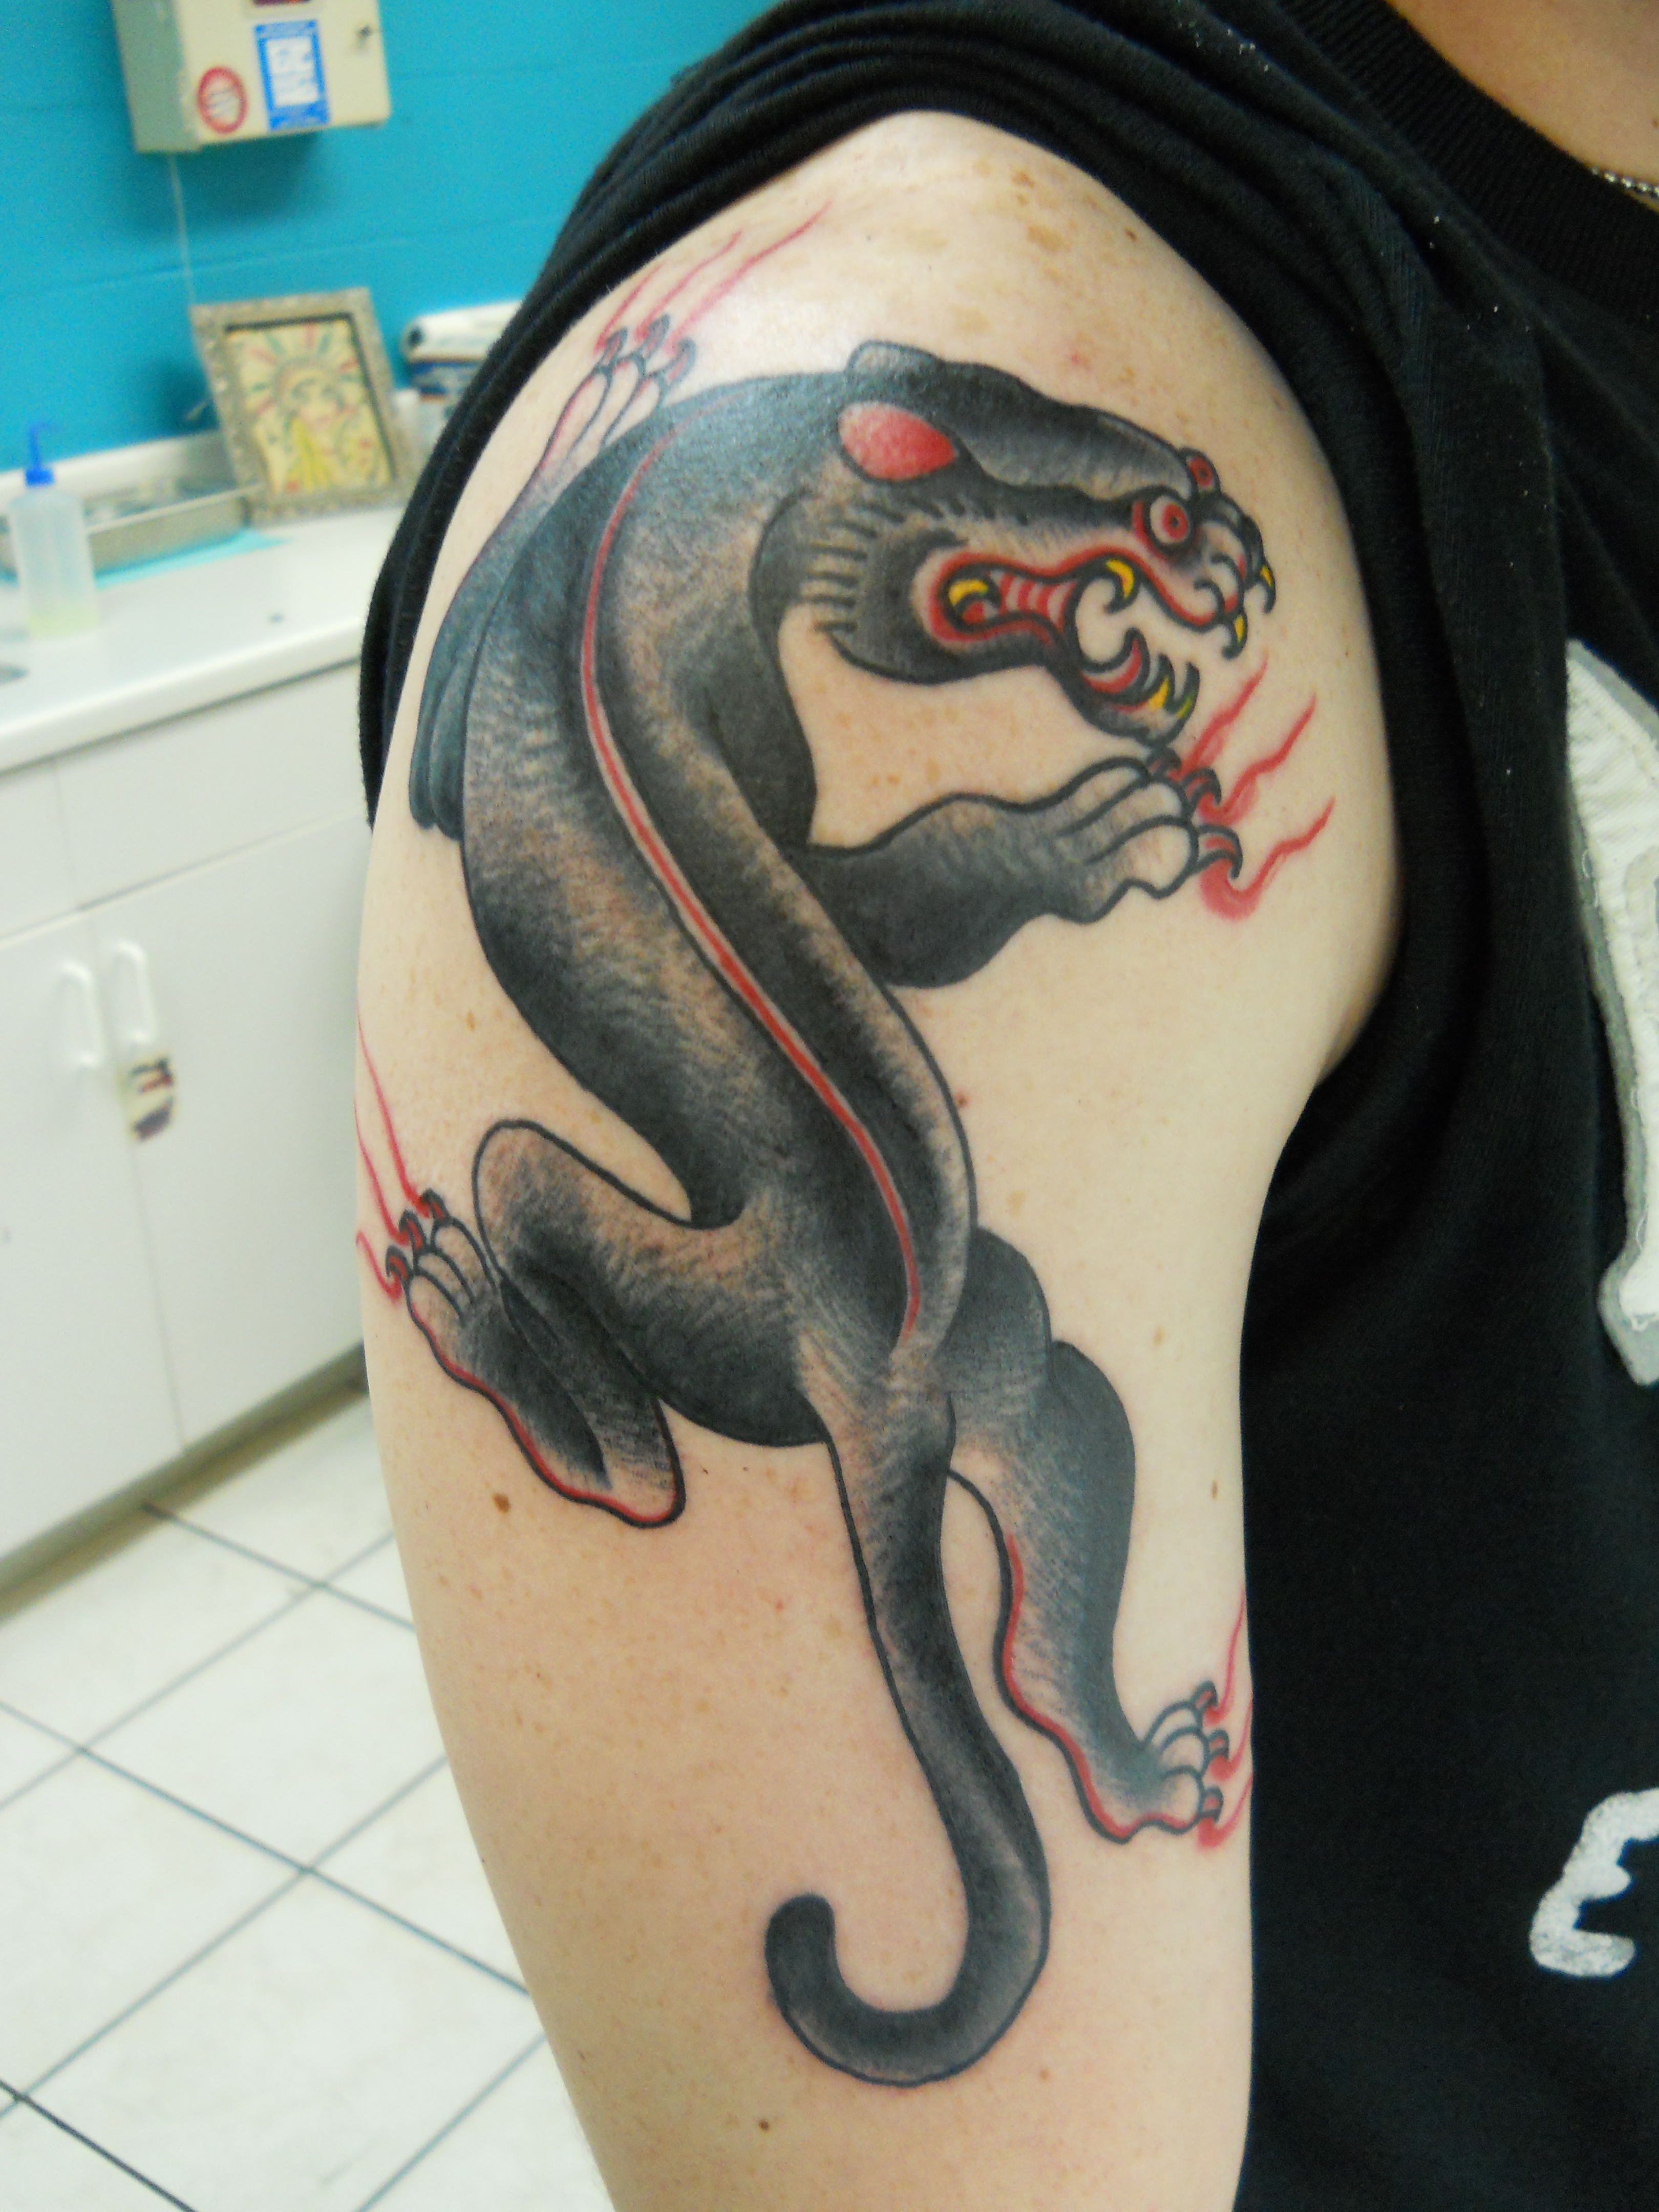 Panther Tattoos Designs, Ideas and Meaning | Tattoos For You